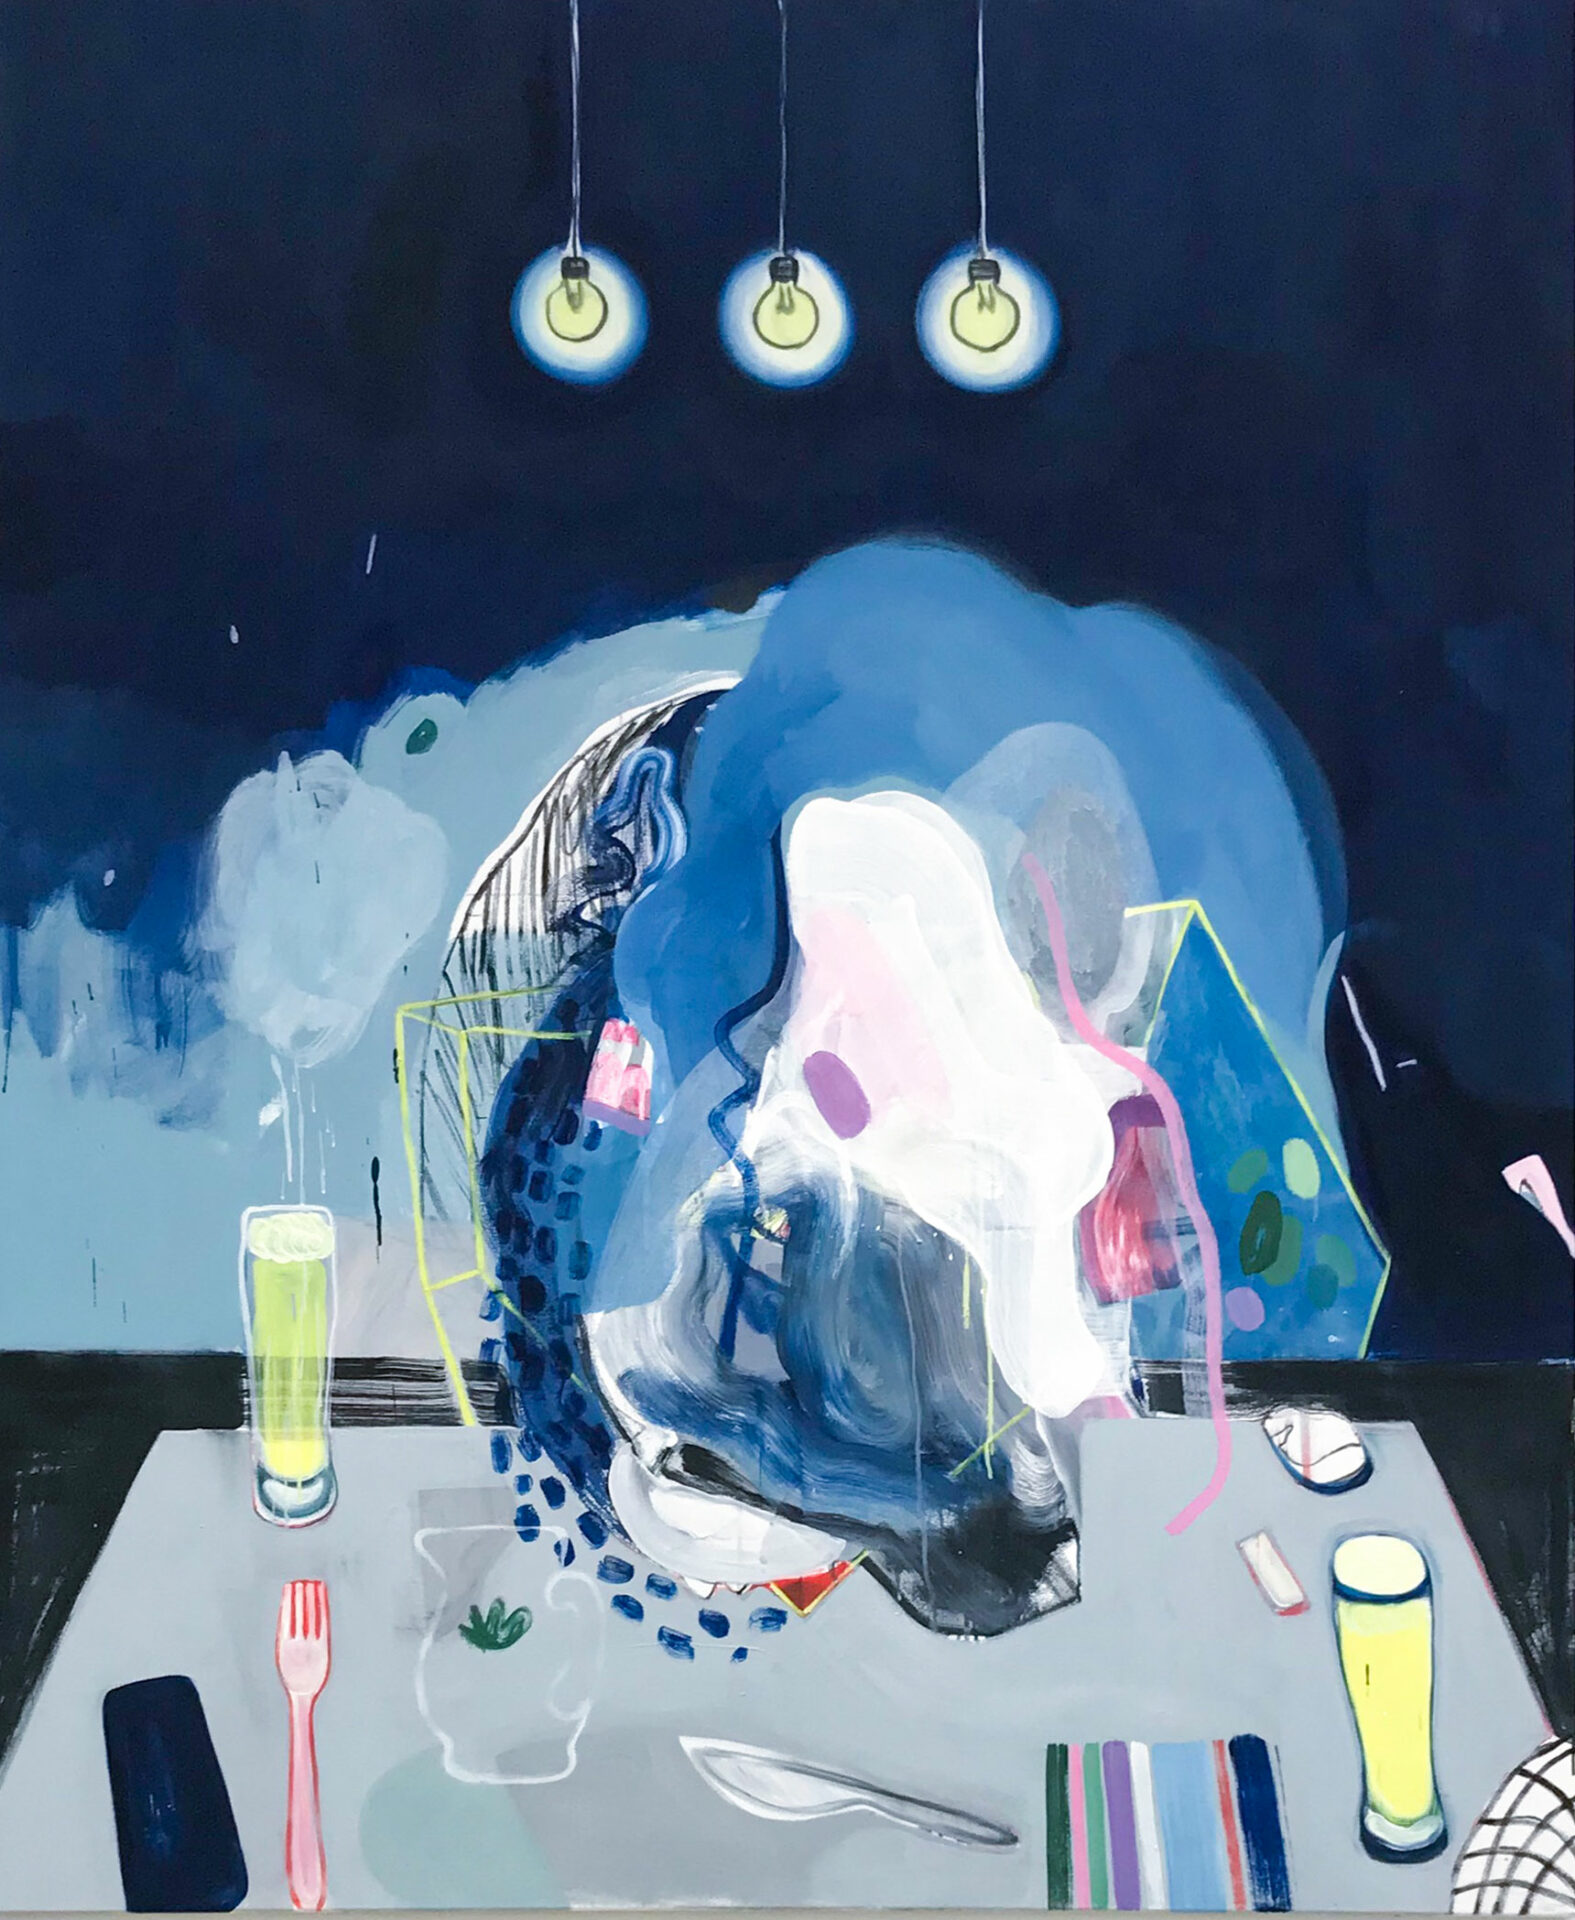 Dinner with Ghosts, Mixed Media on cotton, 175 x 145 cm, 2019, Lisa Breyer